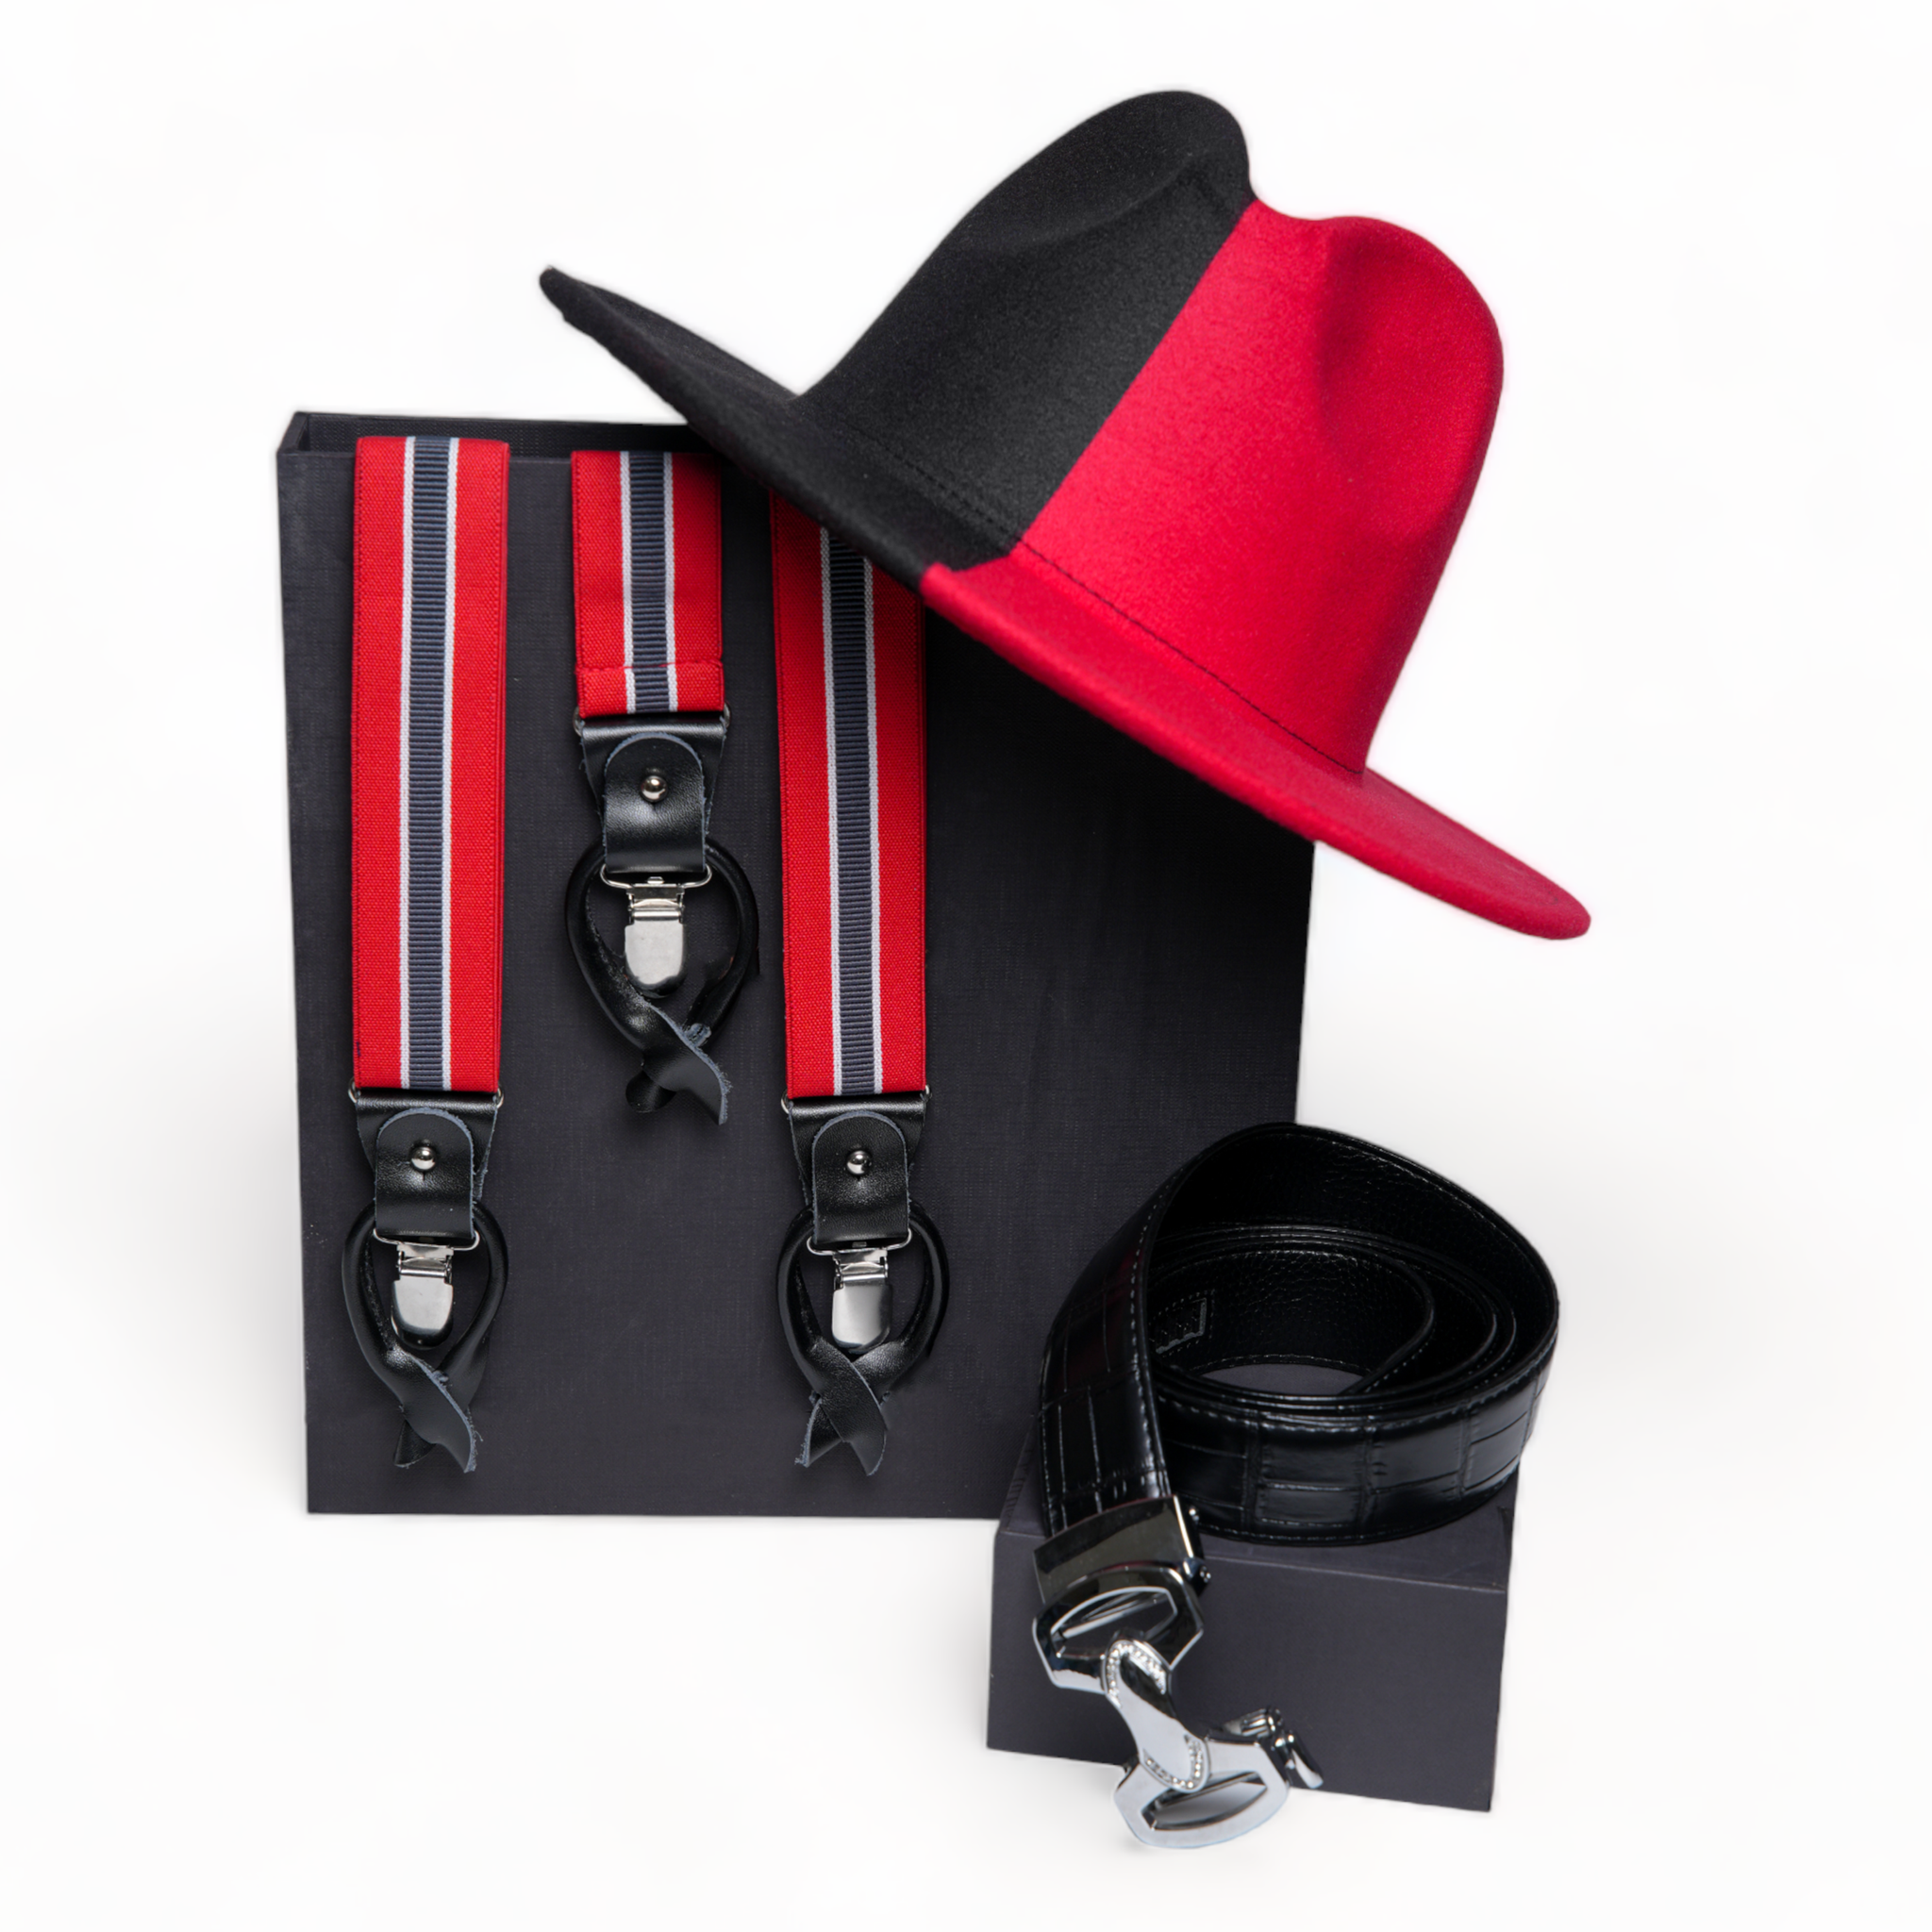 Chokore Special 3-in-1 Gift Set for Him (Y-shaped Suspenders, Fedora Hat, & Leather Belt)